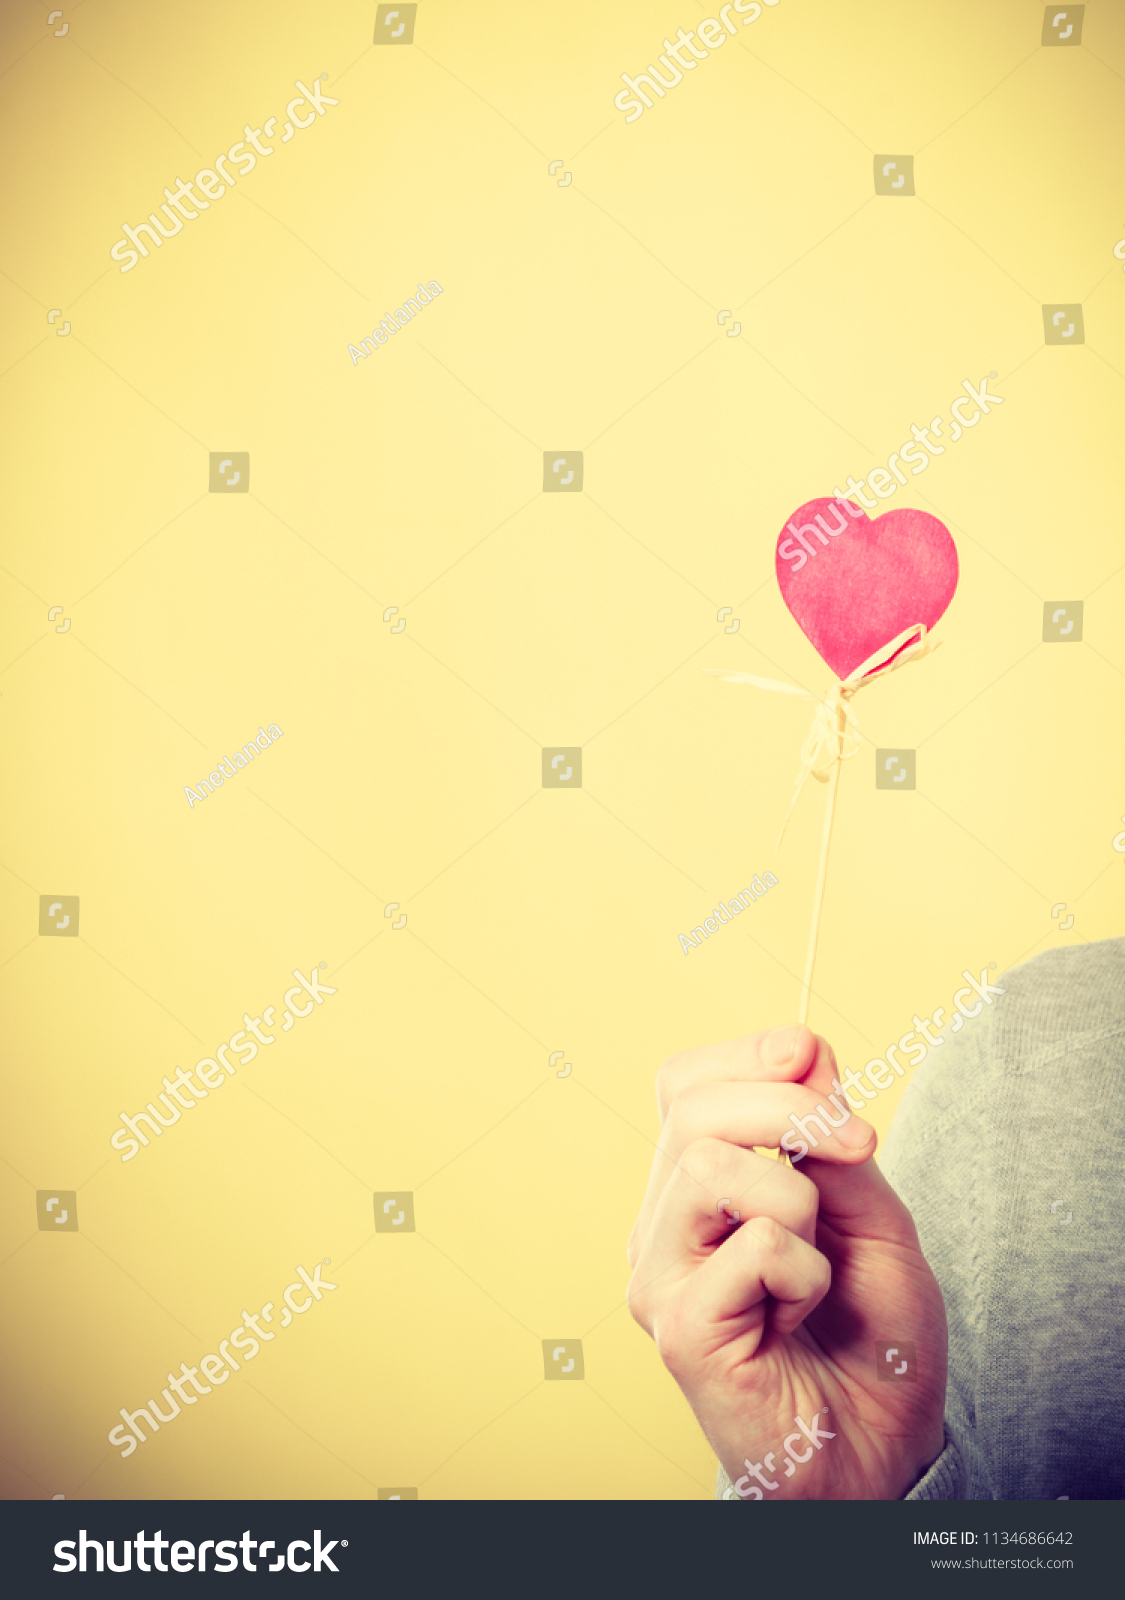 Symbolism romance relationship affection valentines concept. Male person holding heart on stick. Someone presenting love symbol on pole. #1134686642